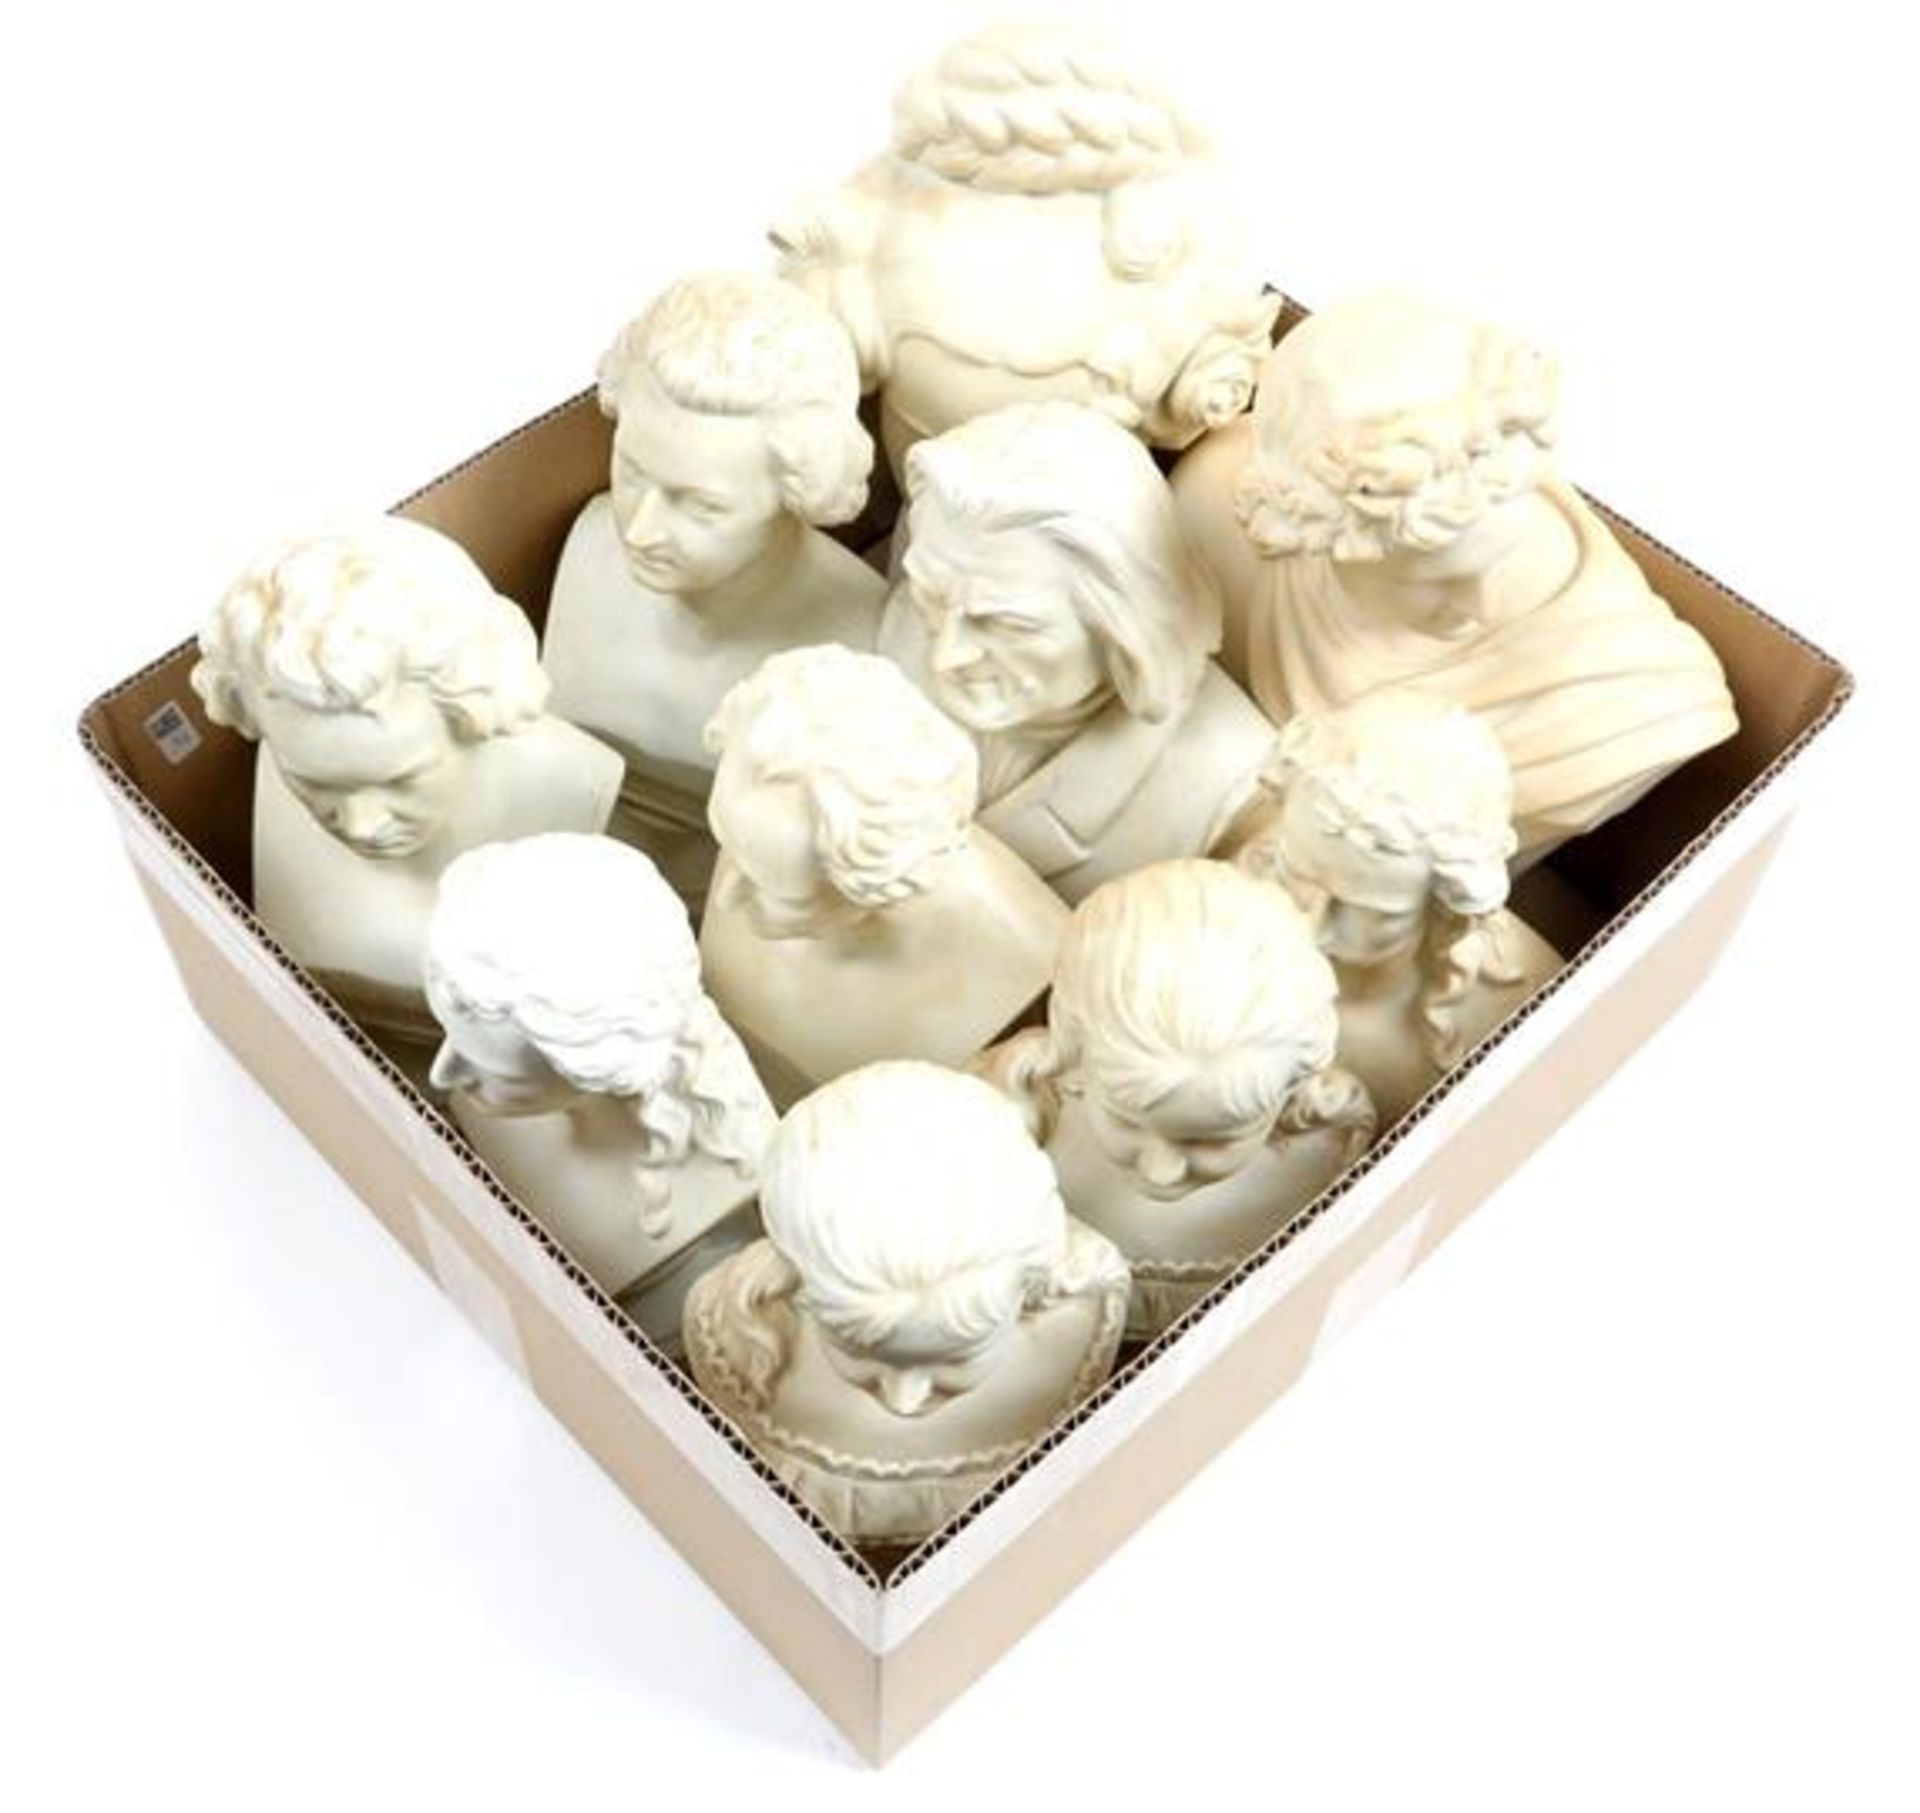 10 various biscuit porcelain busts of, among others, Beethoven, Liszt, Christ and Wilhelmina